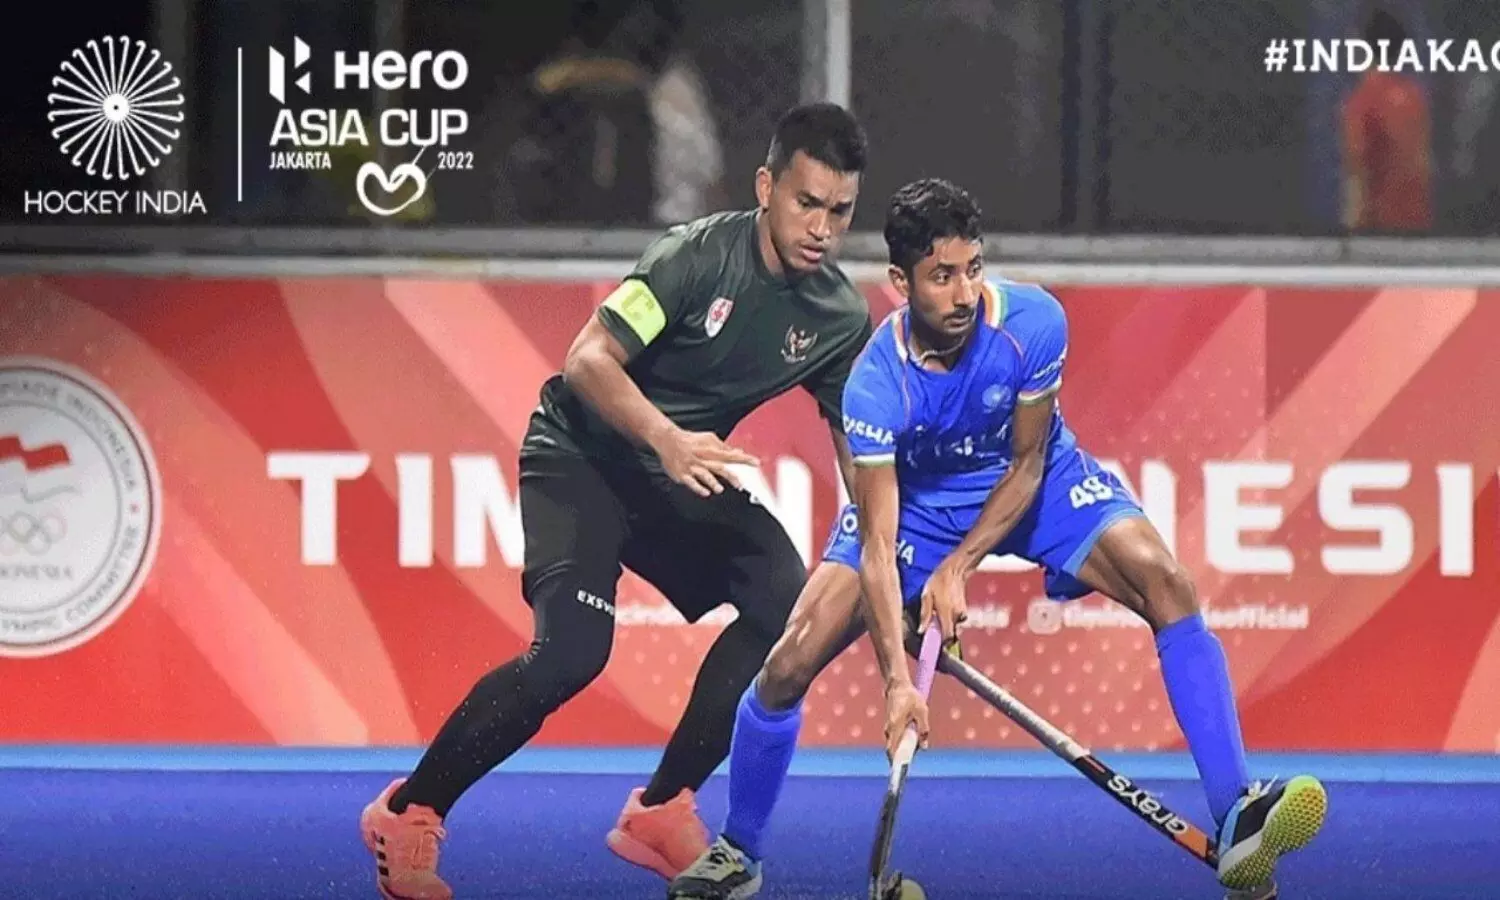 Asia Cup Hockey India vs Indonesia